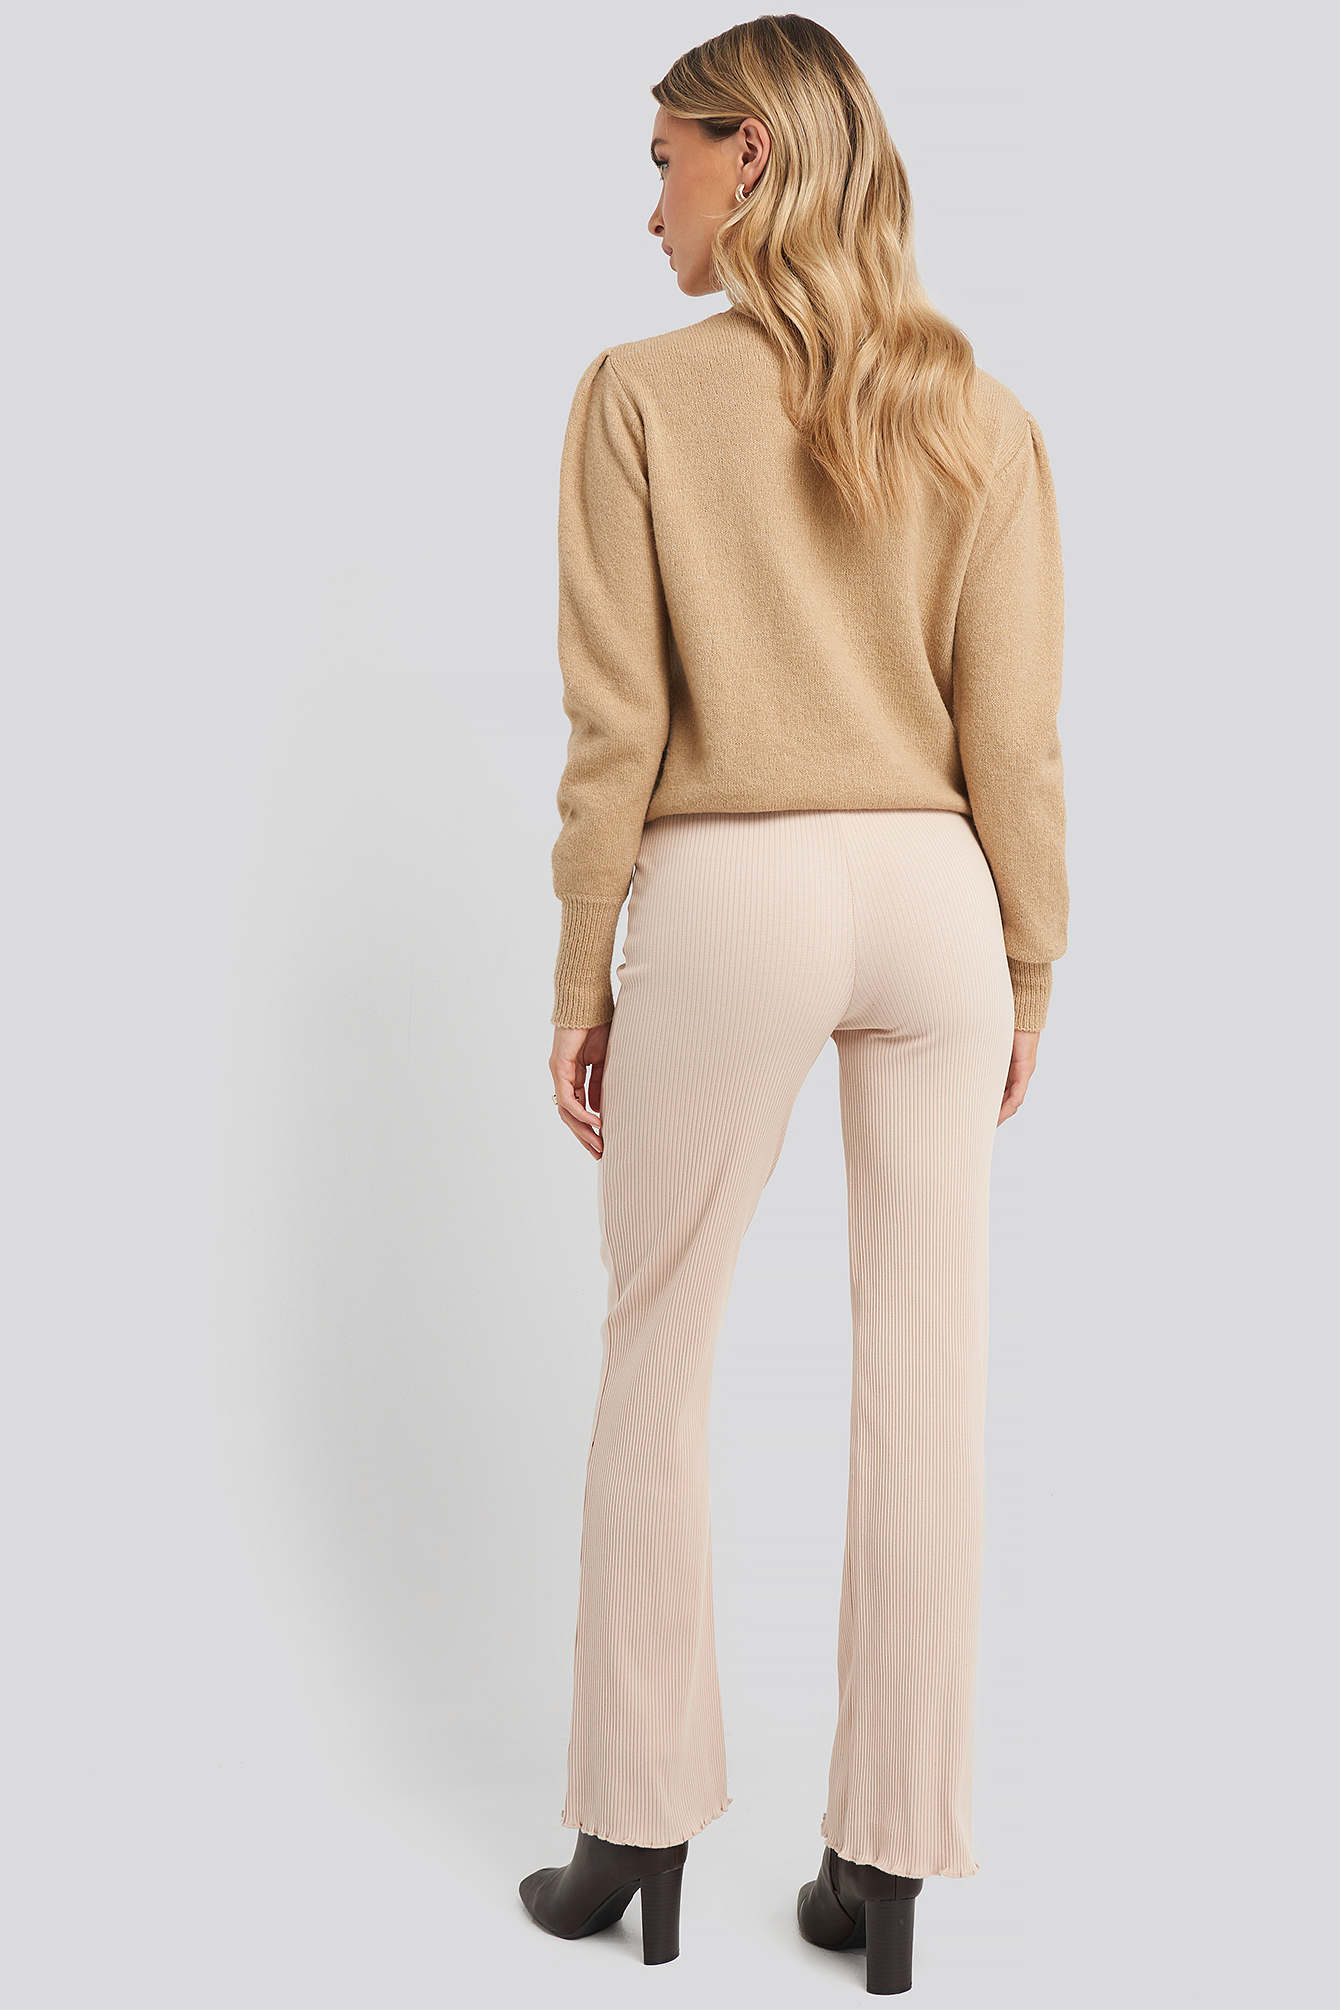 ASYOU embroidered velour flare pants in tan - part of a set | ASOS